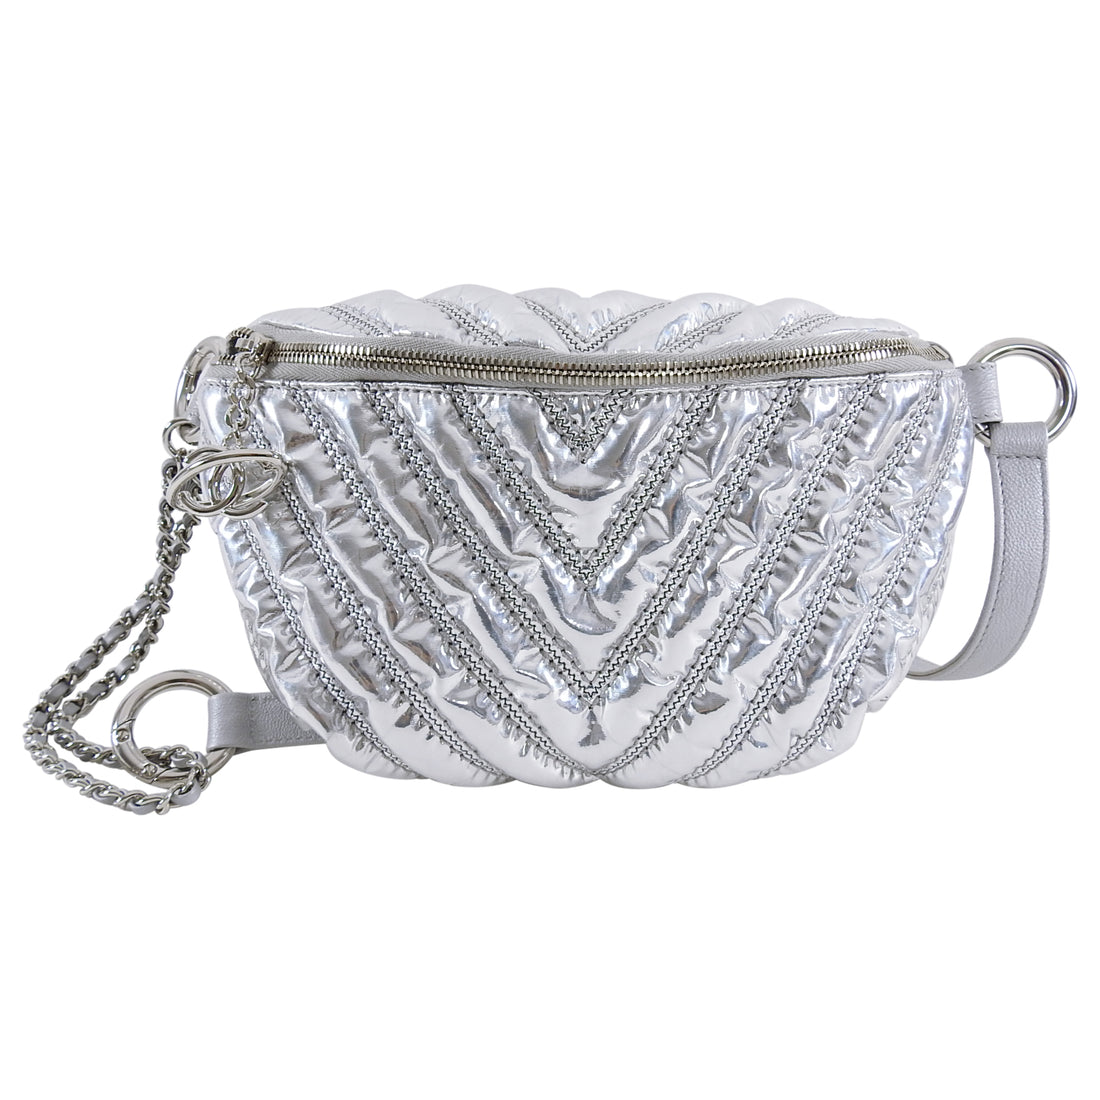 Chanel Fall 2017 Silver Metallic Space Belt Bag Fanny Pack – I MISS YOU  VINTAGE